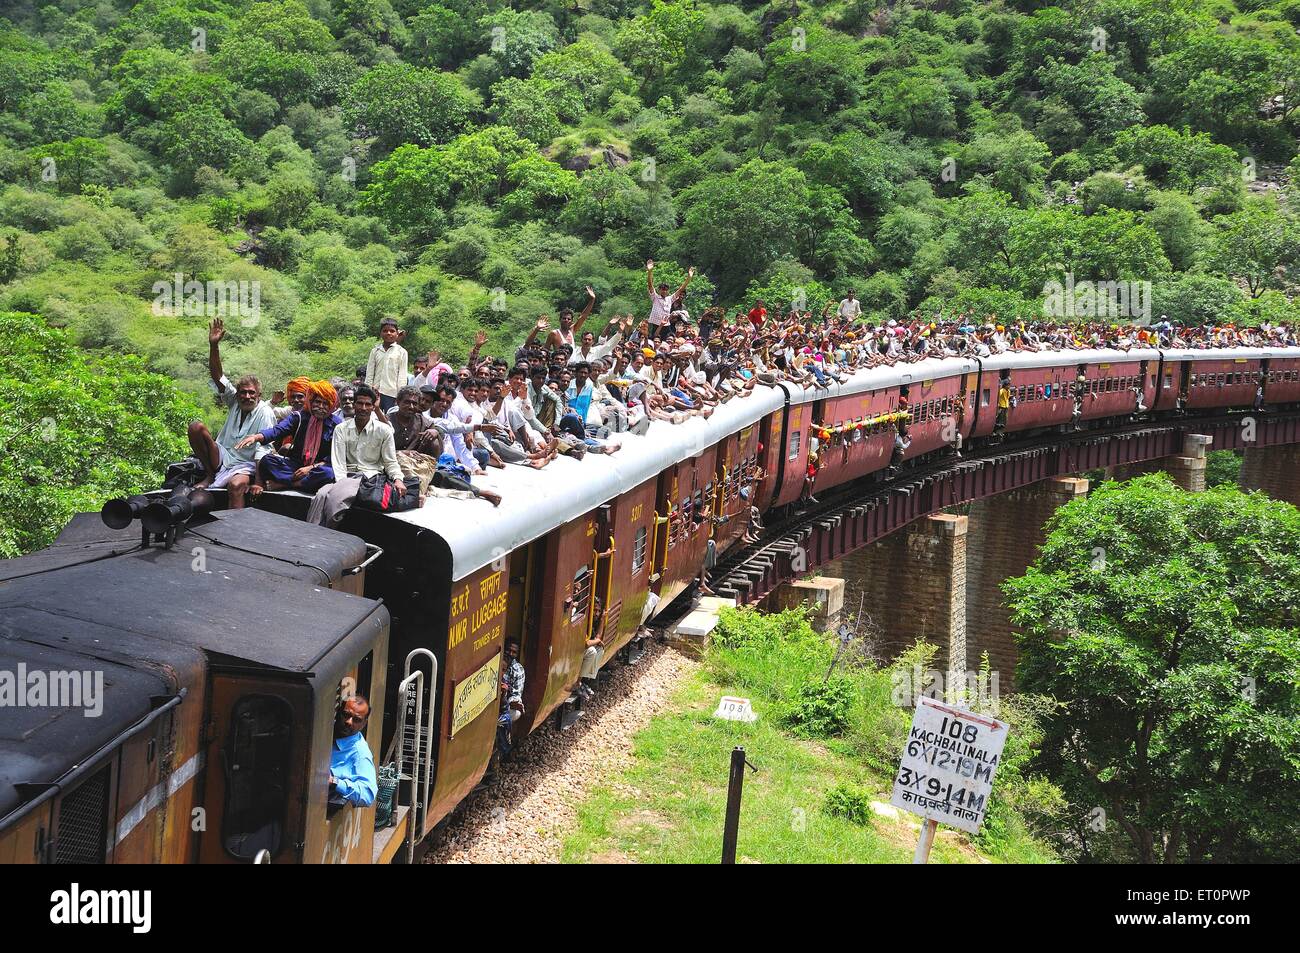 People traveling crowded on roof of train risky dangerous railway travel Jodhpur Rajasthan India Asia Asian Indian Stock Photo